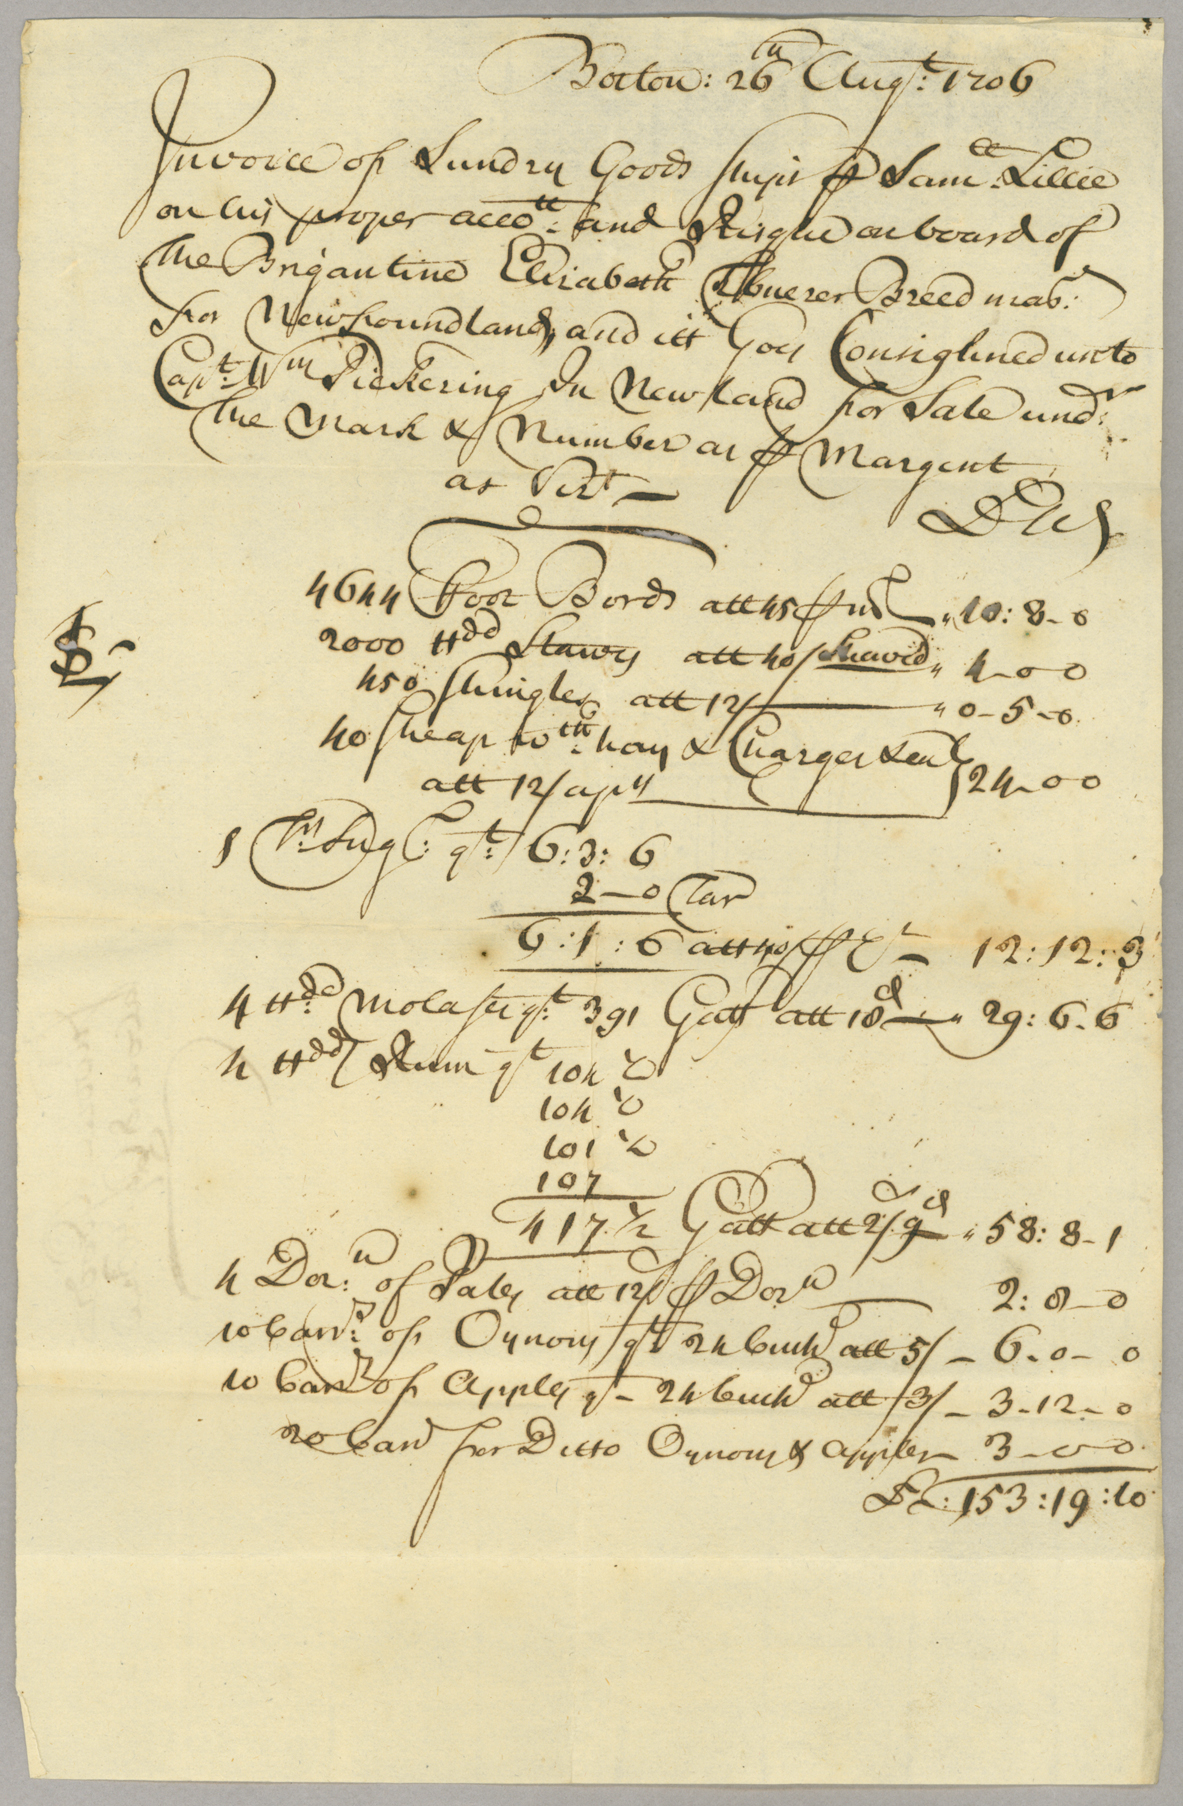 Bill of lading for the Brig Elizabeth, Page 1